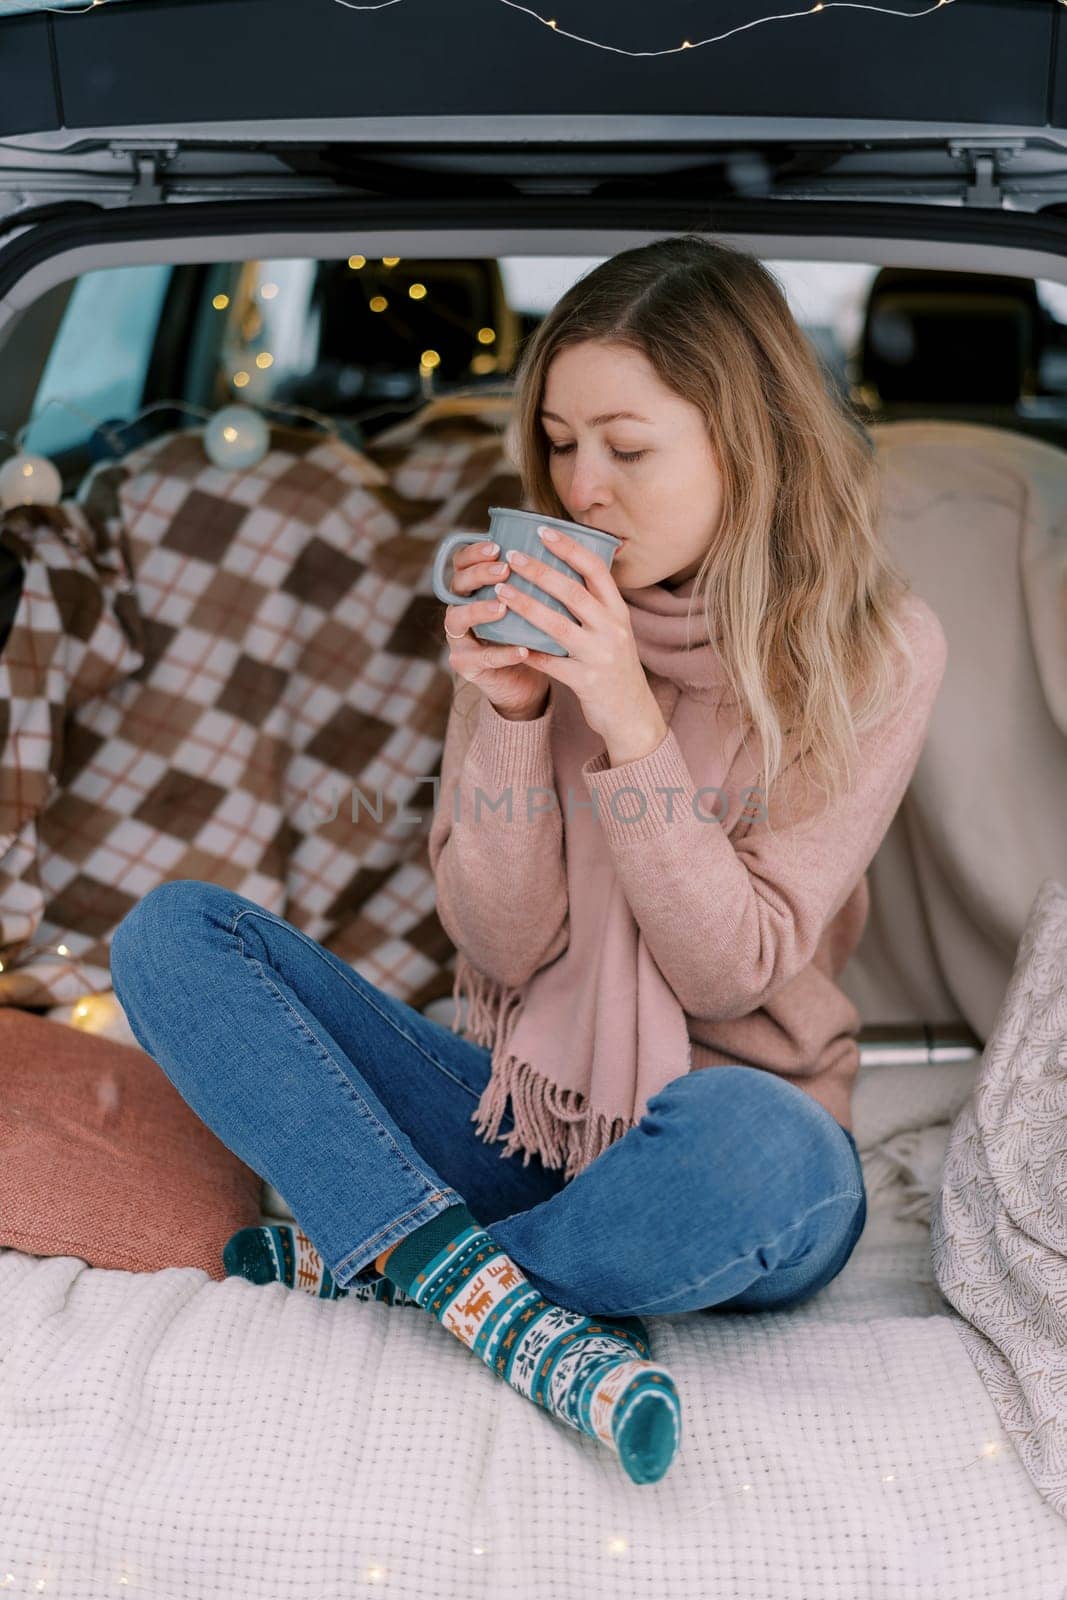 Girl sits cross-legged on a blanket in the trunk of a car and drinks coffee from a mug. High quality photo